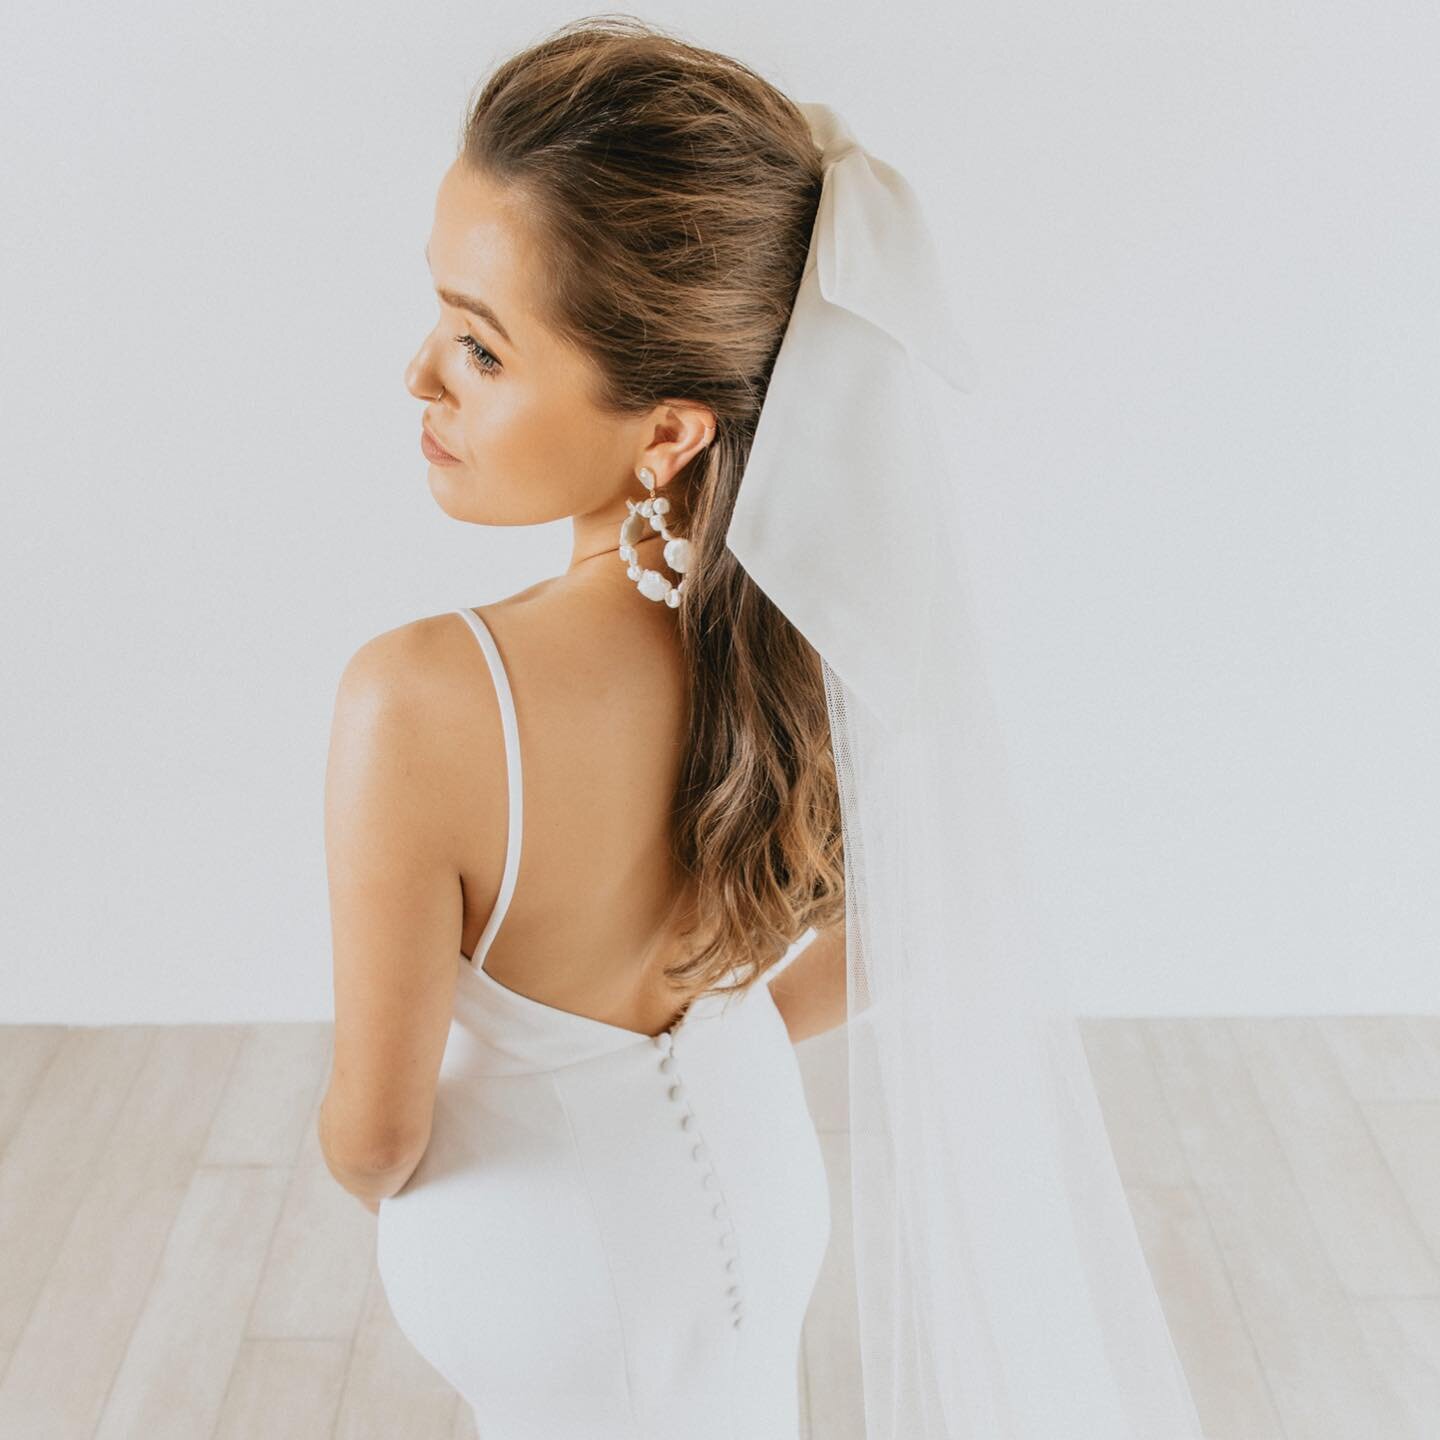 𝐊𝐄𝐄𝐏 𝐈𝐓 𝐒𝐈𝐌𝐏𝐋𝐄
&amp; style it up...that&rsquo;s our thaaang!

Dress: @akristinbridal 
Earrings: @onedamelane 
Veil : @ashleywildbridal 
Bow: @love_story_bride